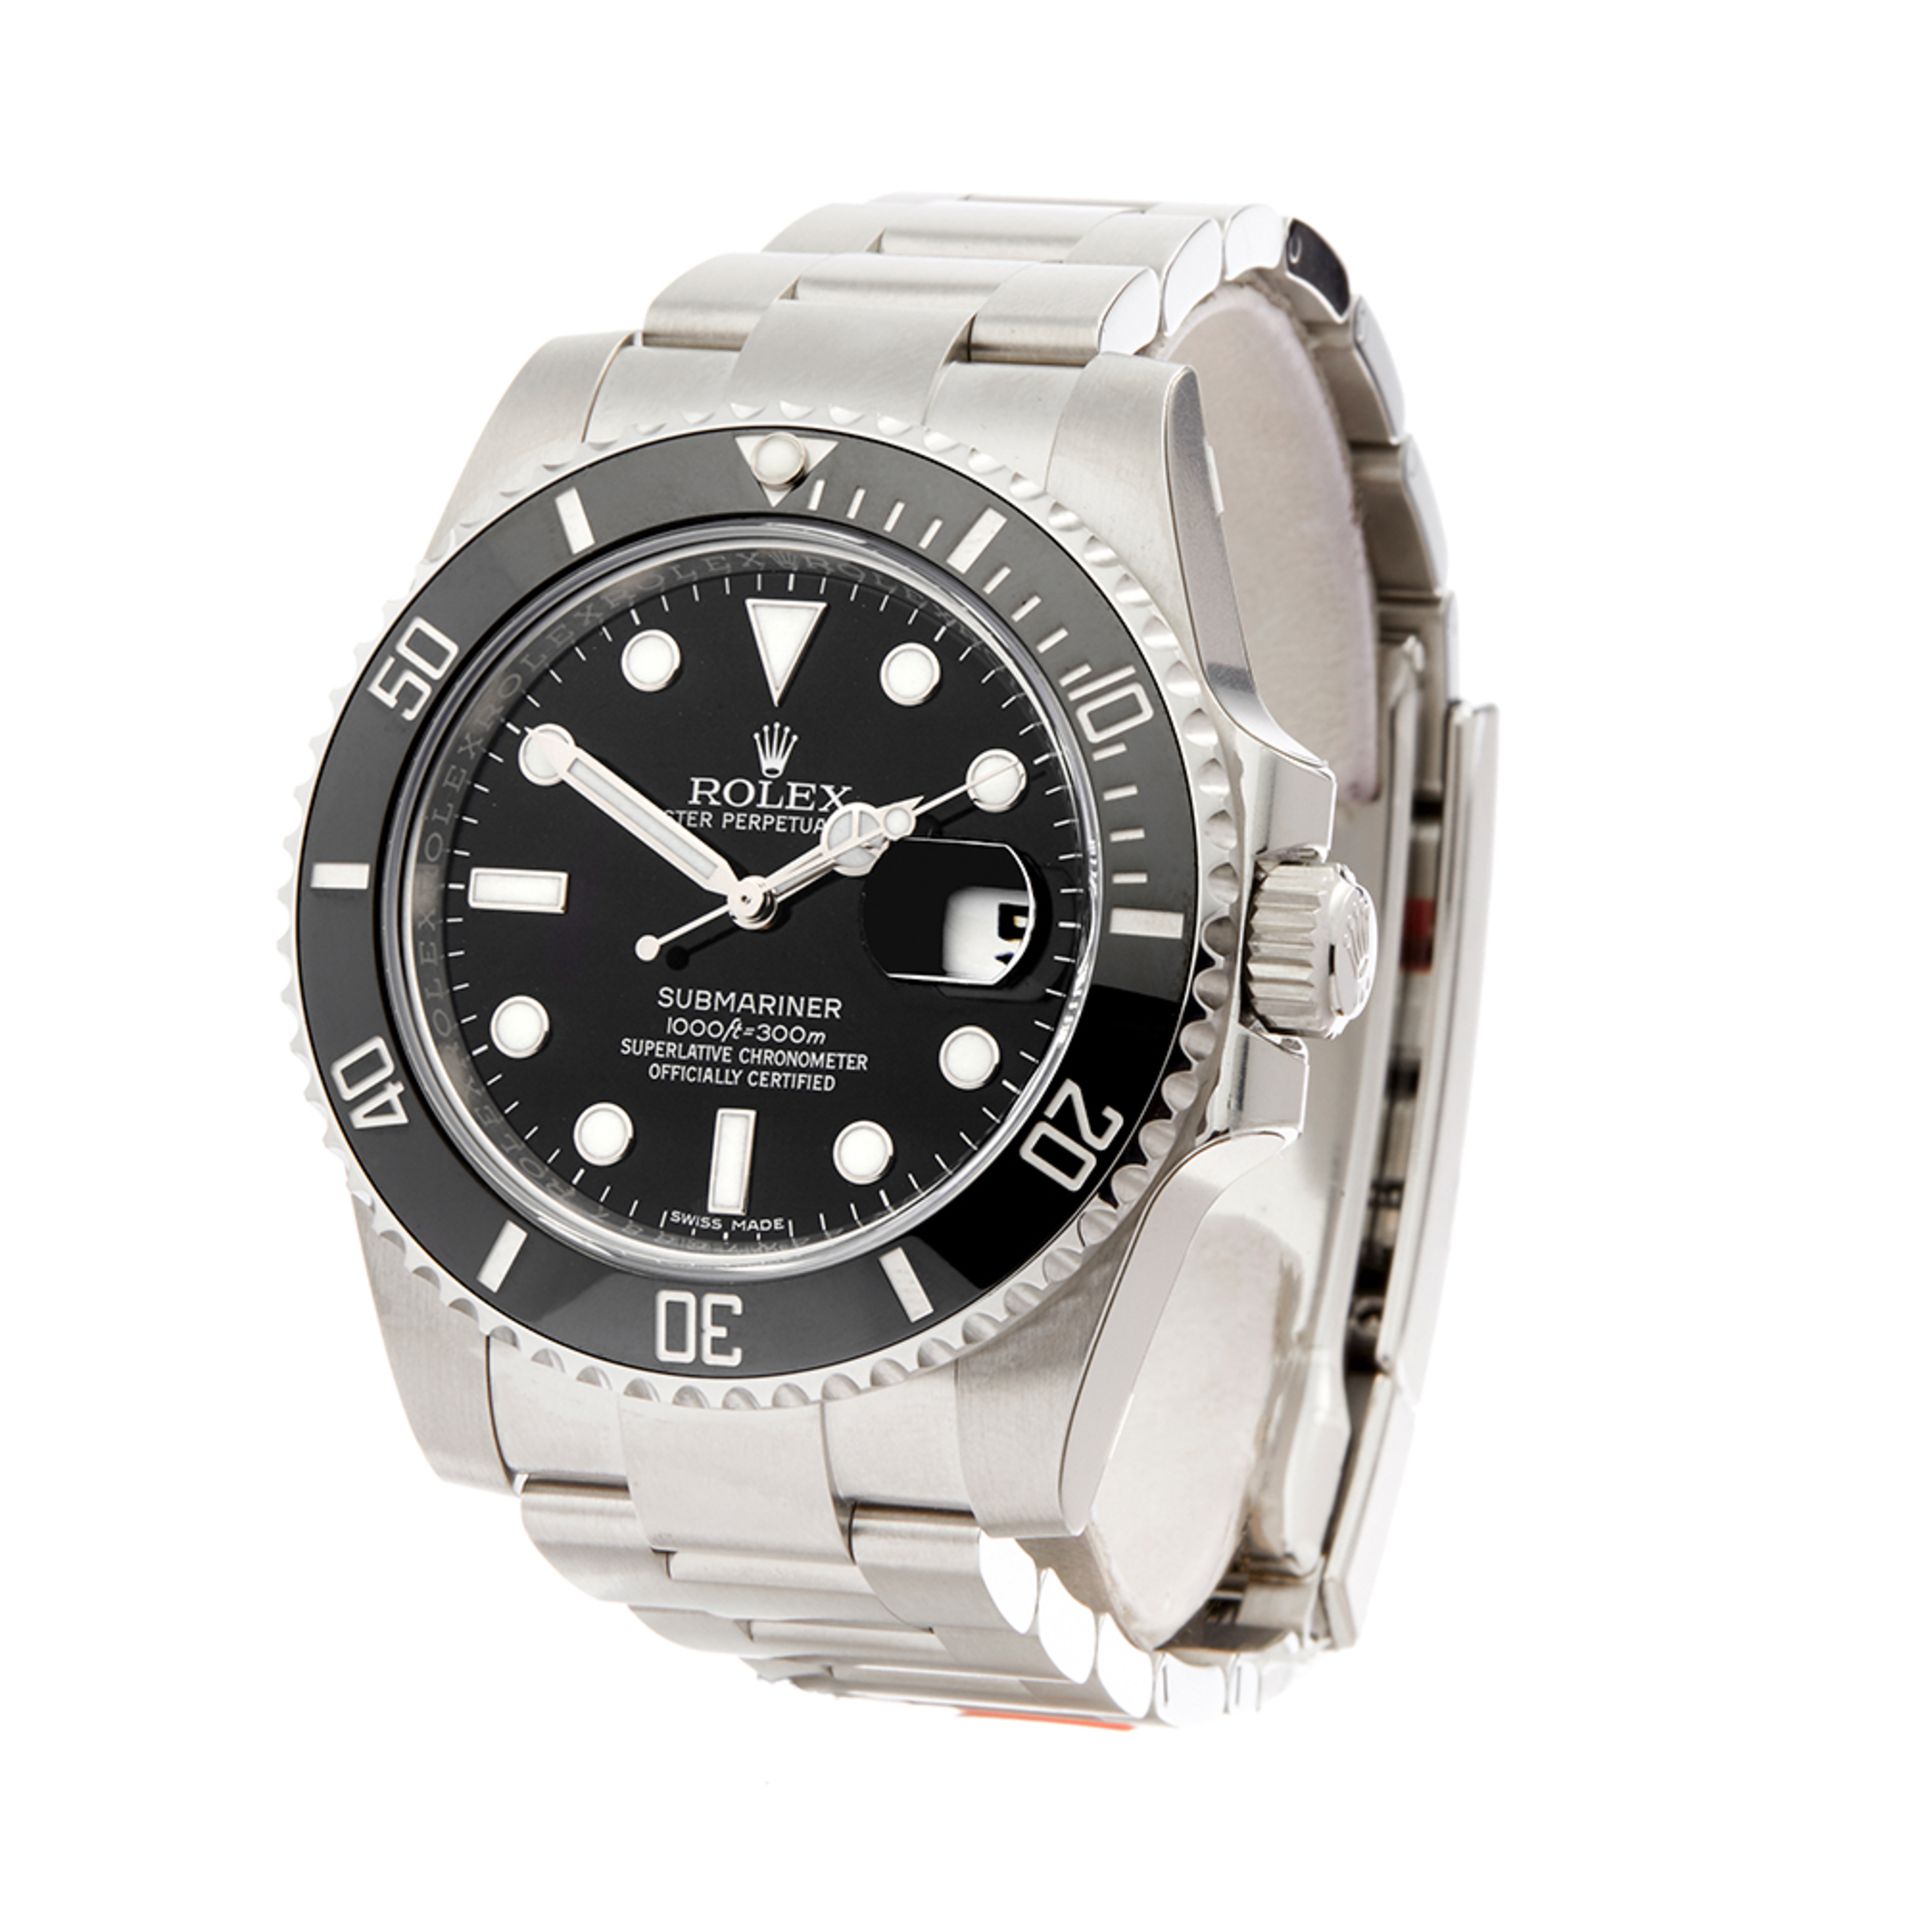 Rolex Submariner Stainless Steel - 116610LN - Image 3 of 7